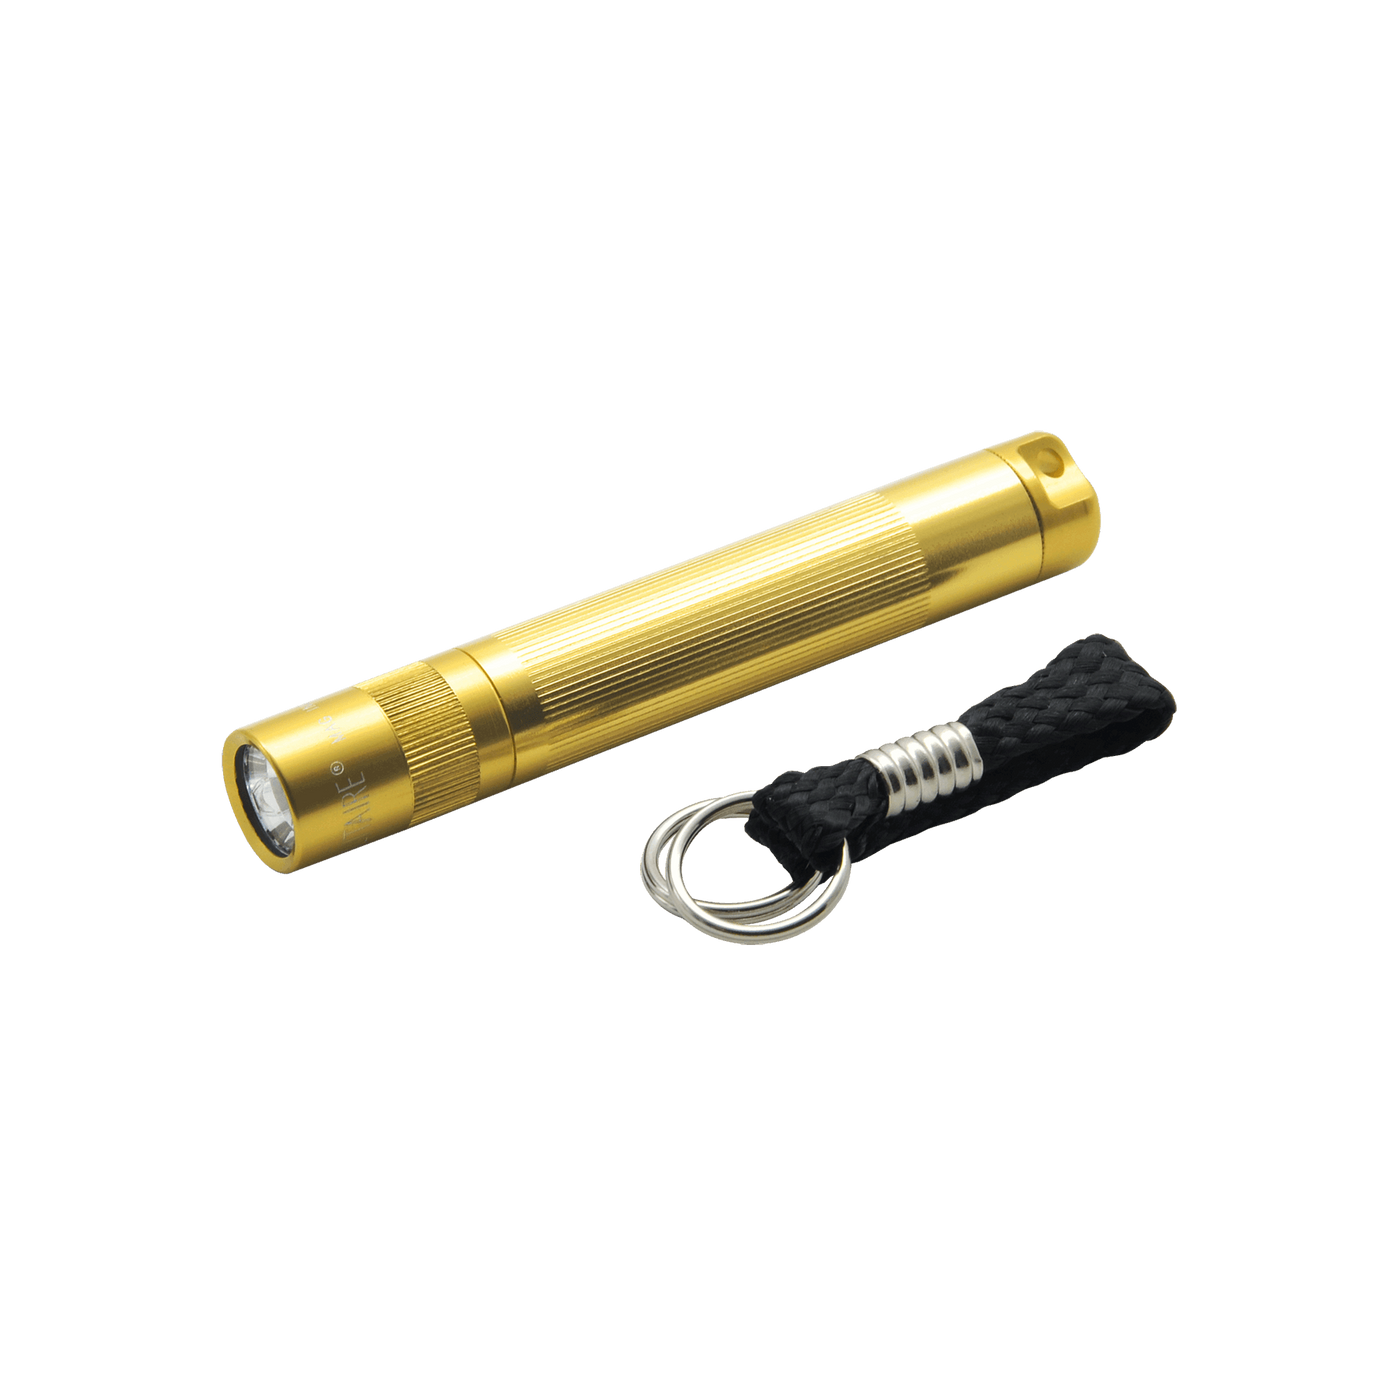 Maglite Solitaire Incandescent 1 AAA - Gold